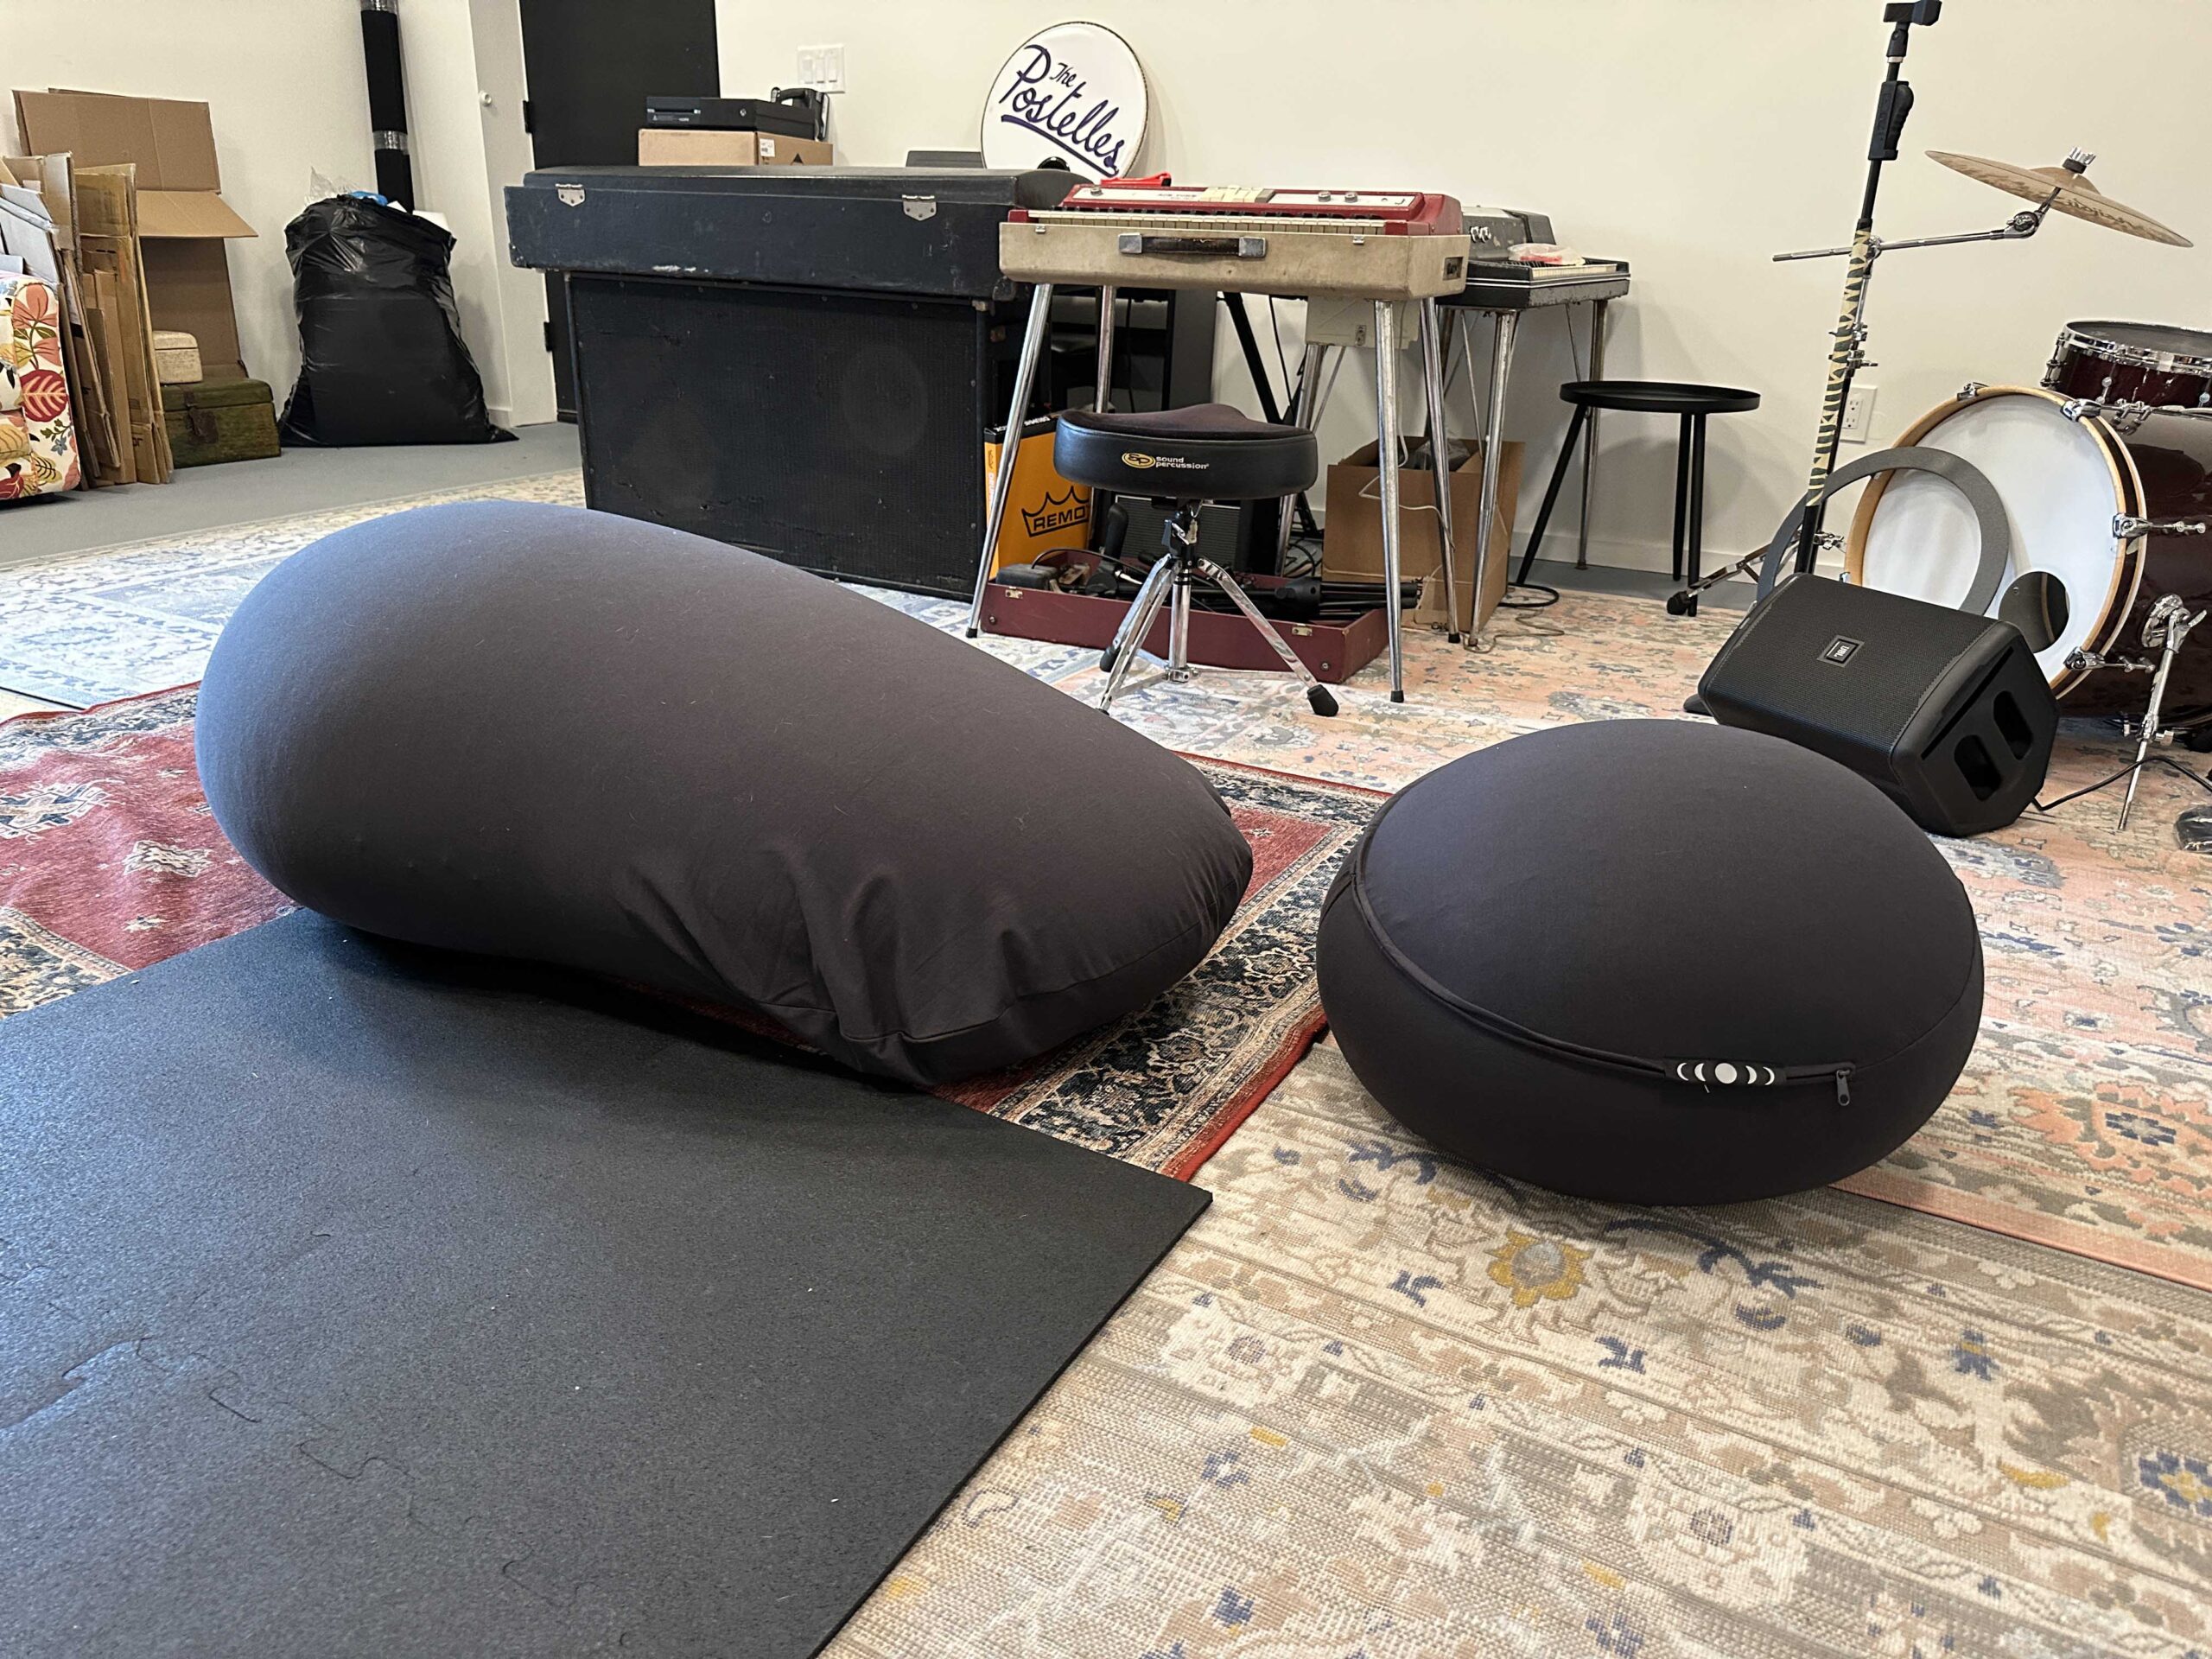 moonpod zero gravity chair on top of carpets and in front of musical instruments